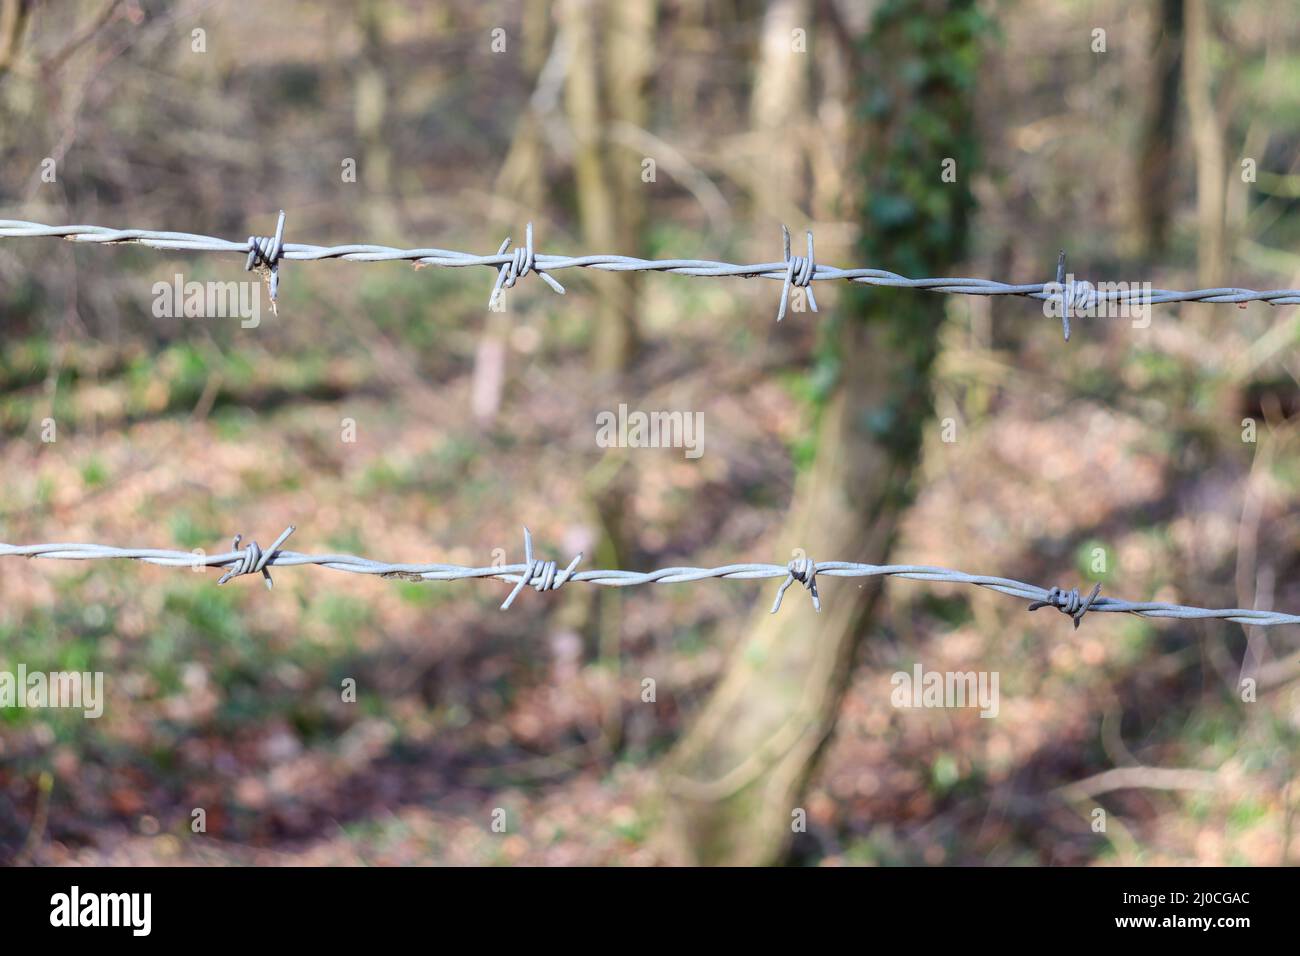 Keep out of the countryside, barbed wire fencing in the countryside Stock Photo